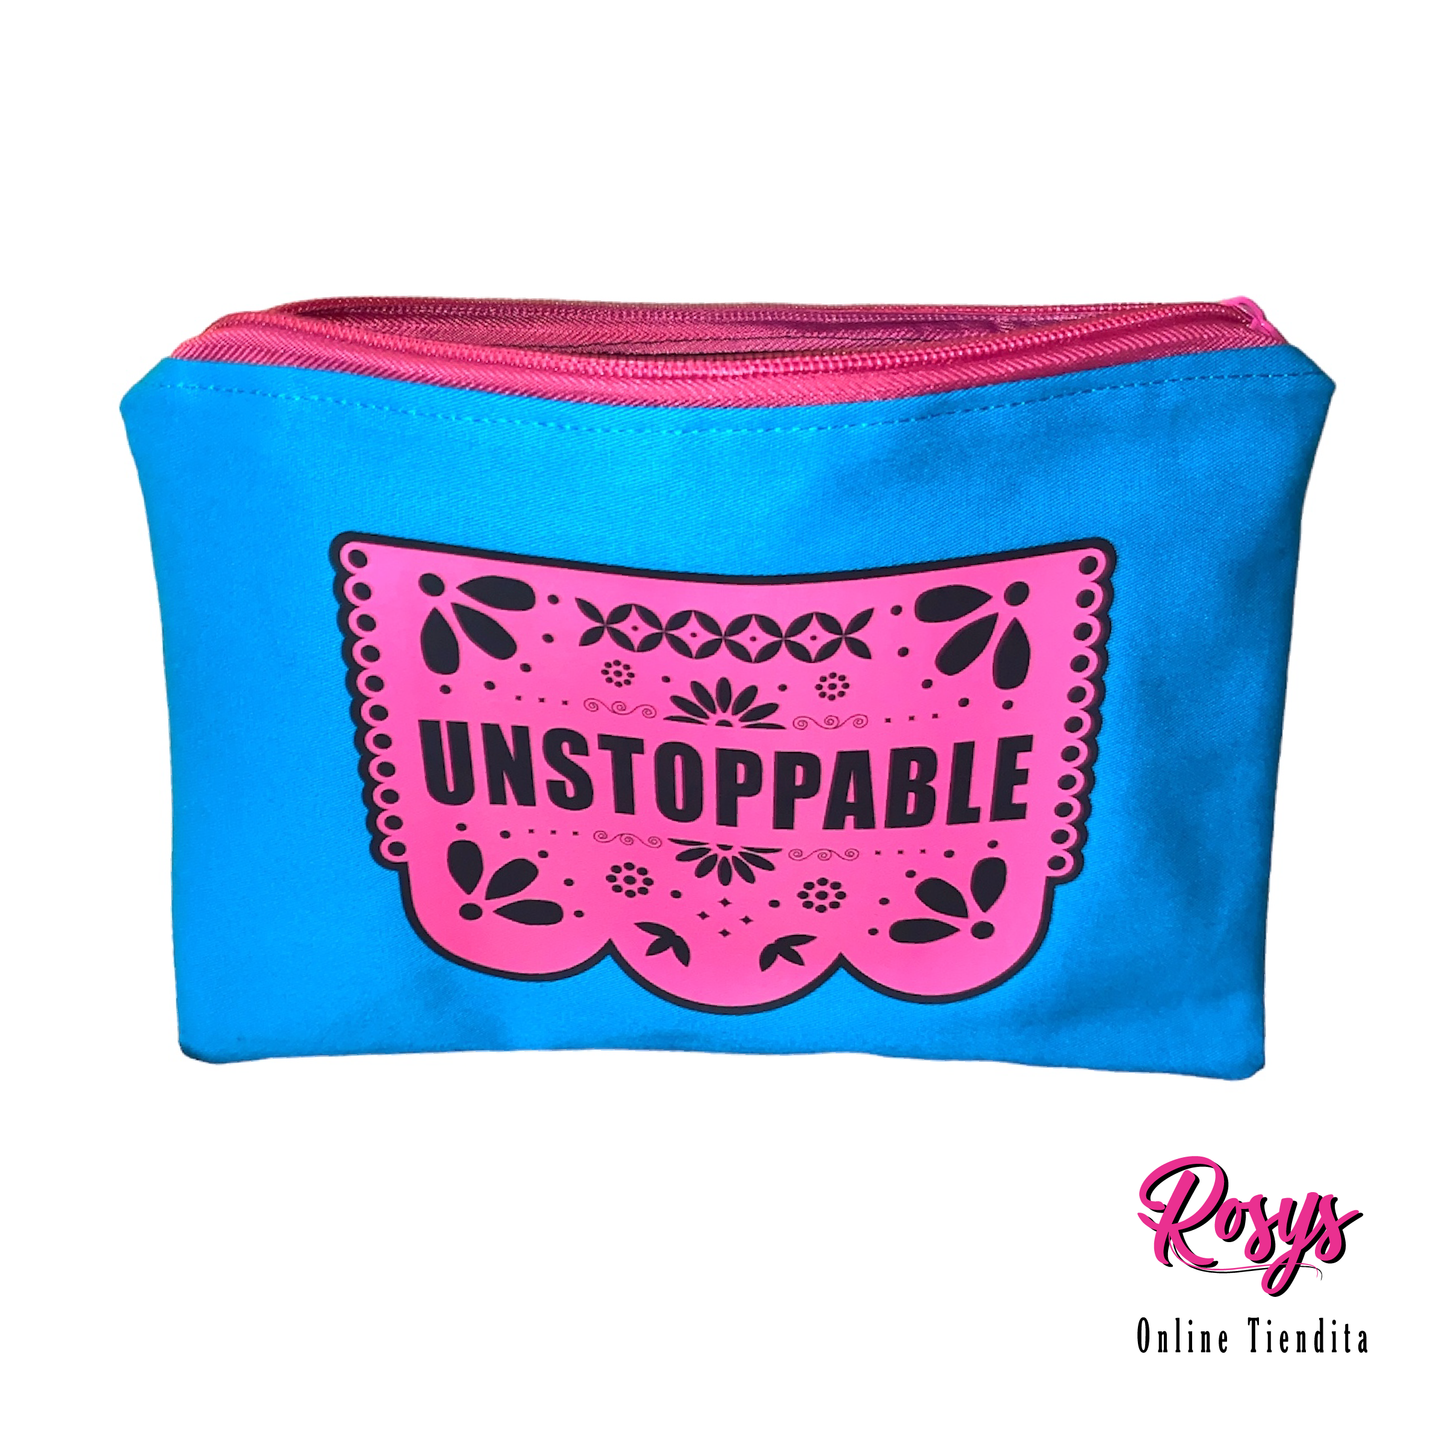 Unstoppable Papel Picado Cosmetic Bag | Cosmetic Bags